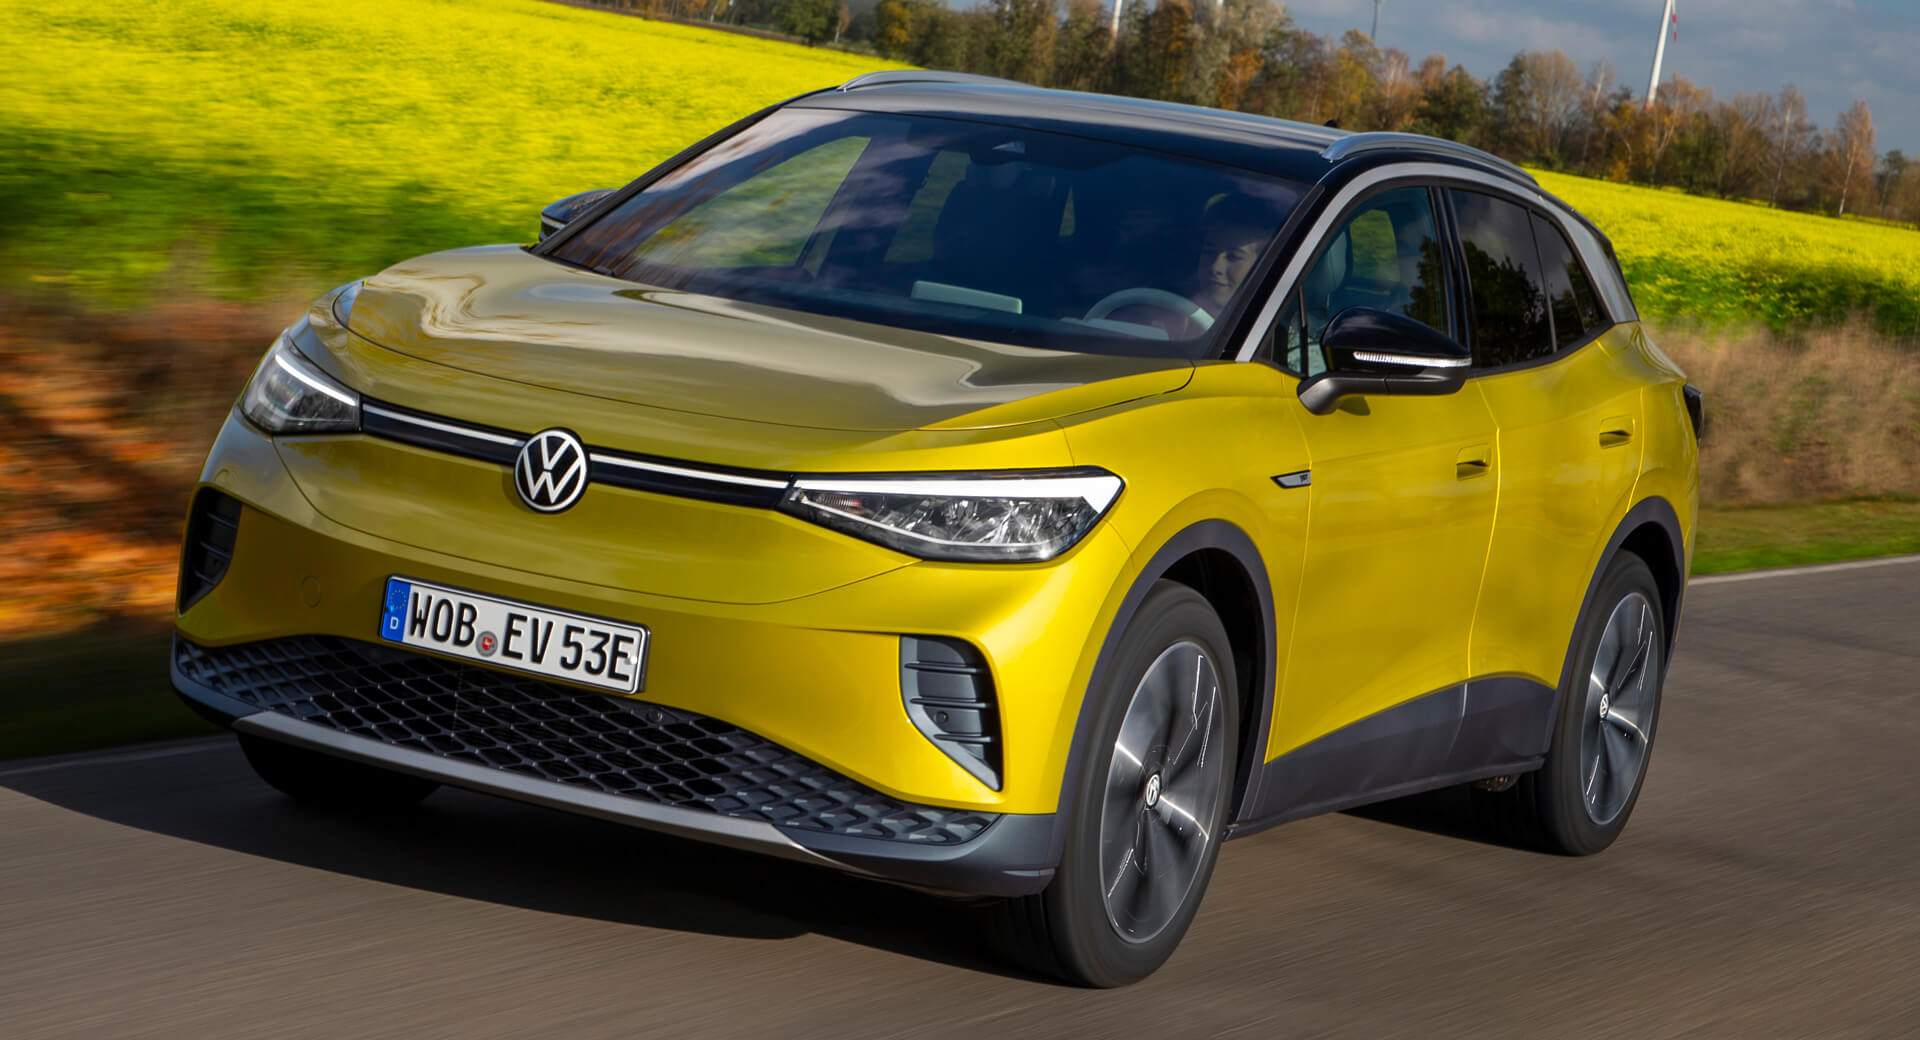 2021 VW ID.4 1st Edition Electric SUV Launched In The UK Priced From £